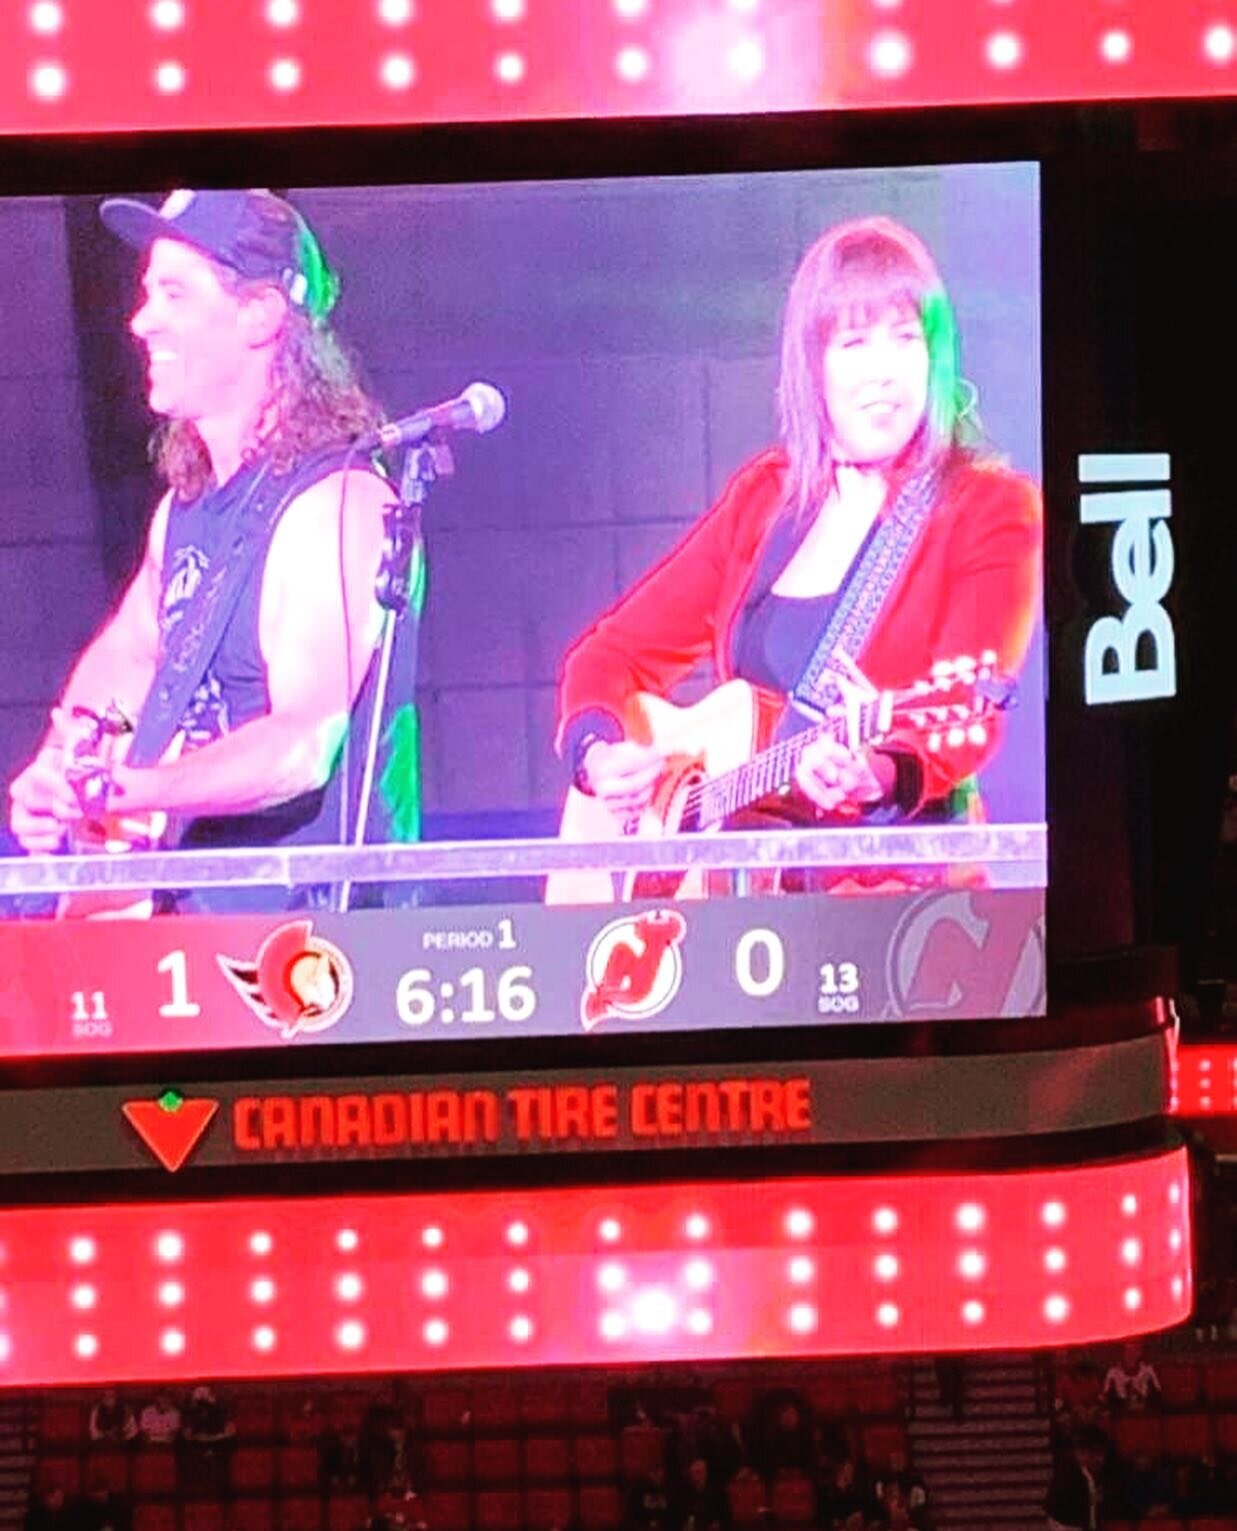 Latergram! 
What a week for Steamy Boots! From playing our first full band show at Heart &amp; Crown to performing at the Senators game with some of our best friends and musical comrades. 
Thank you for having us @senators and congrats on the epic ov